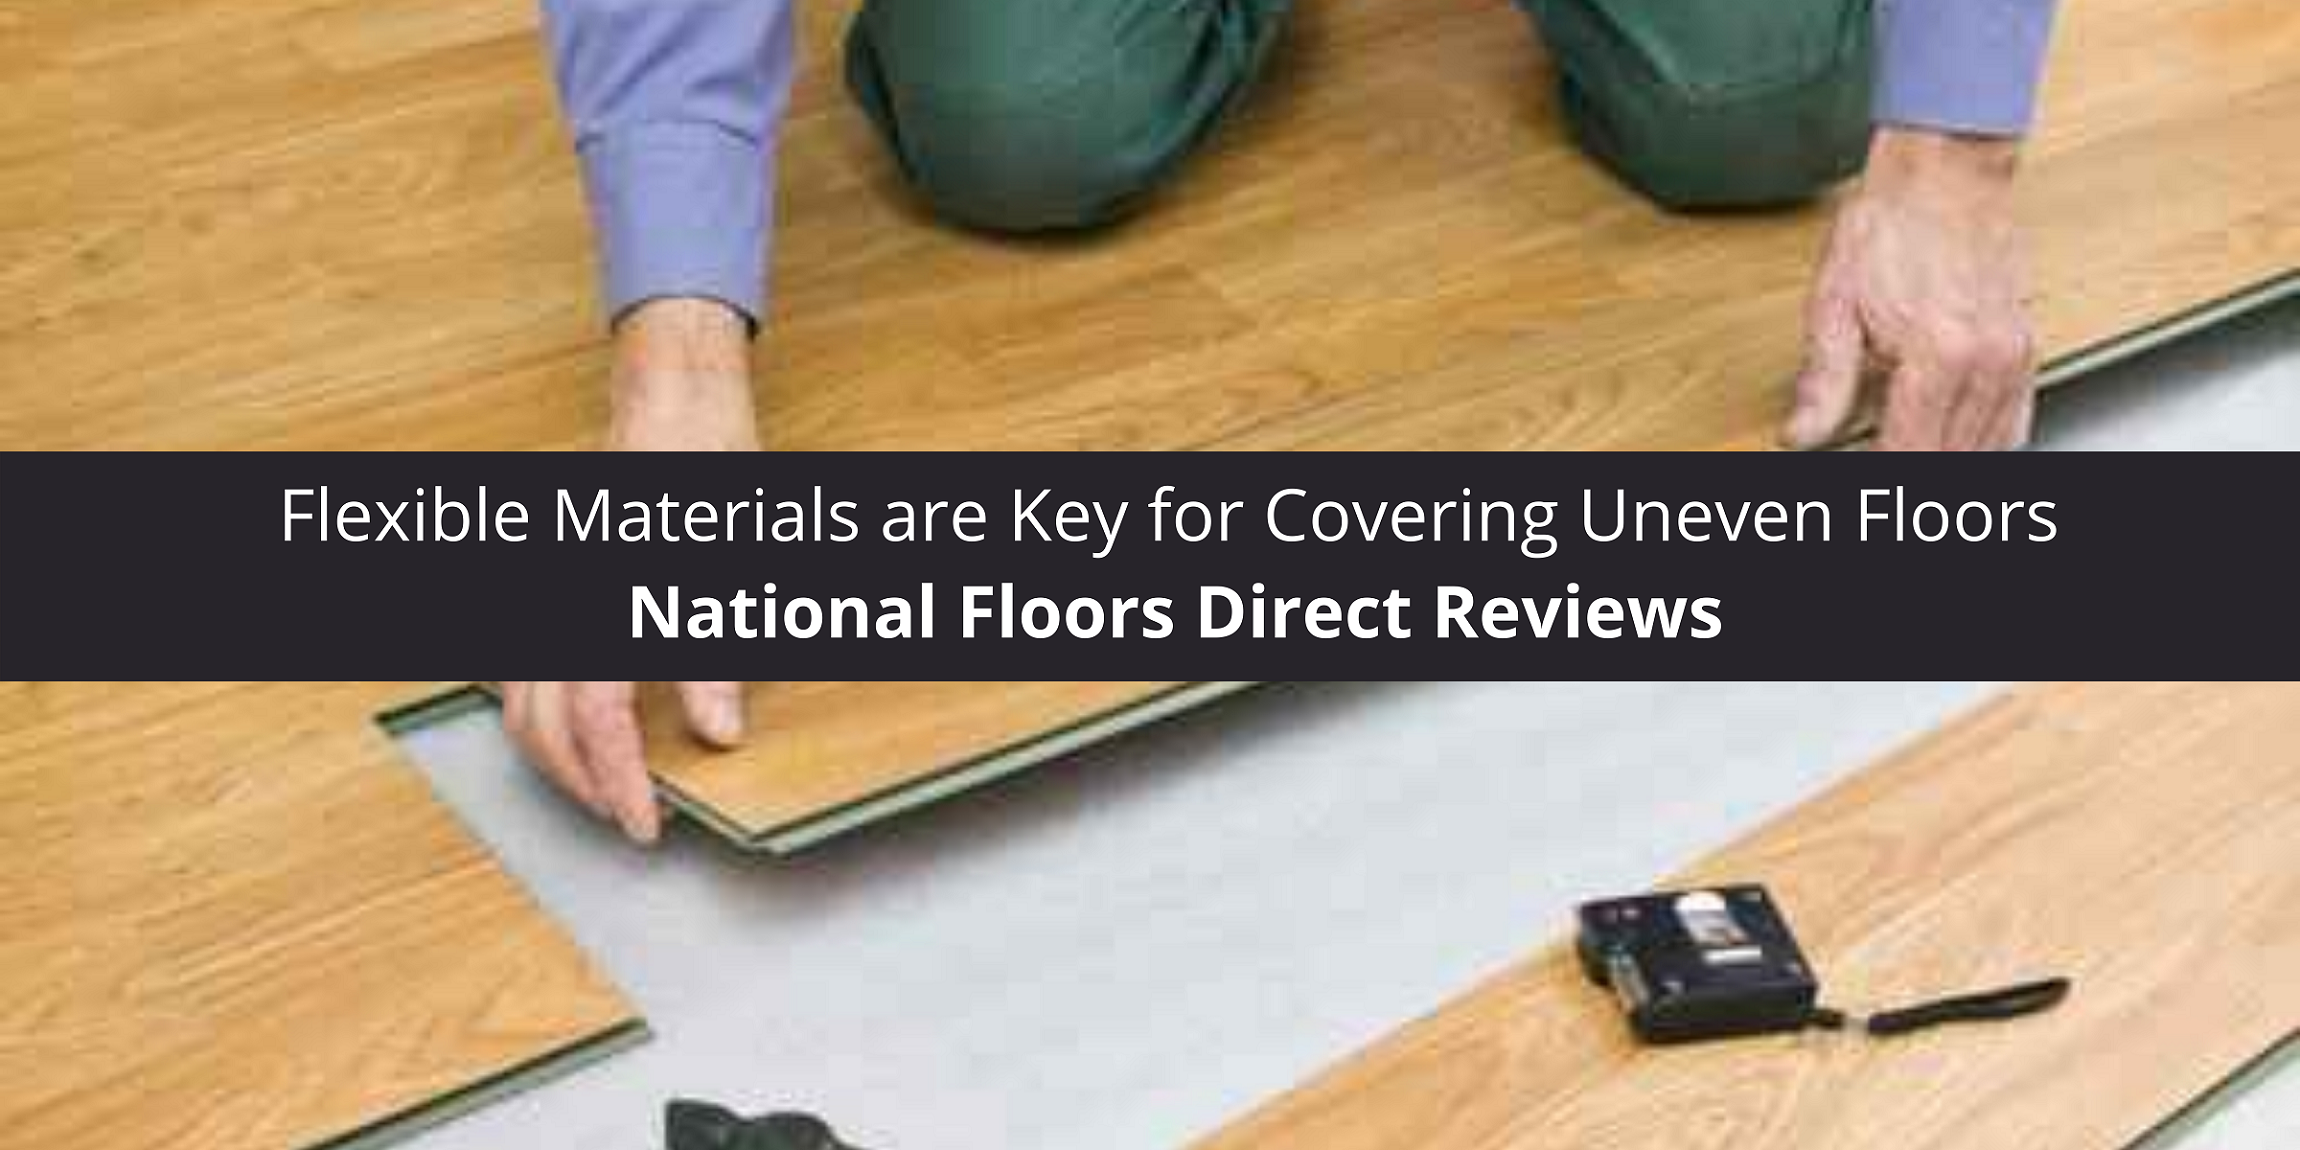 National Floors Direct Reviews Flexible Materials are Key for Covering